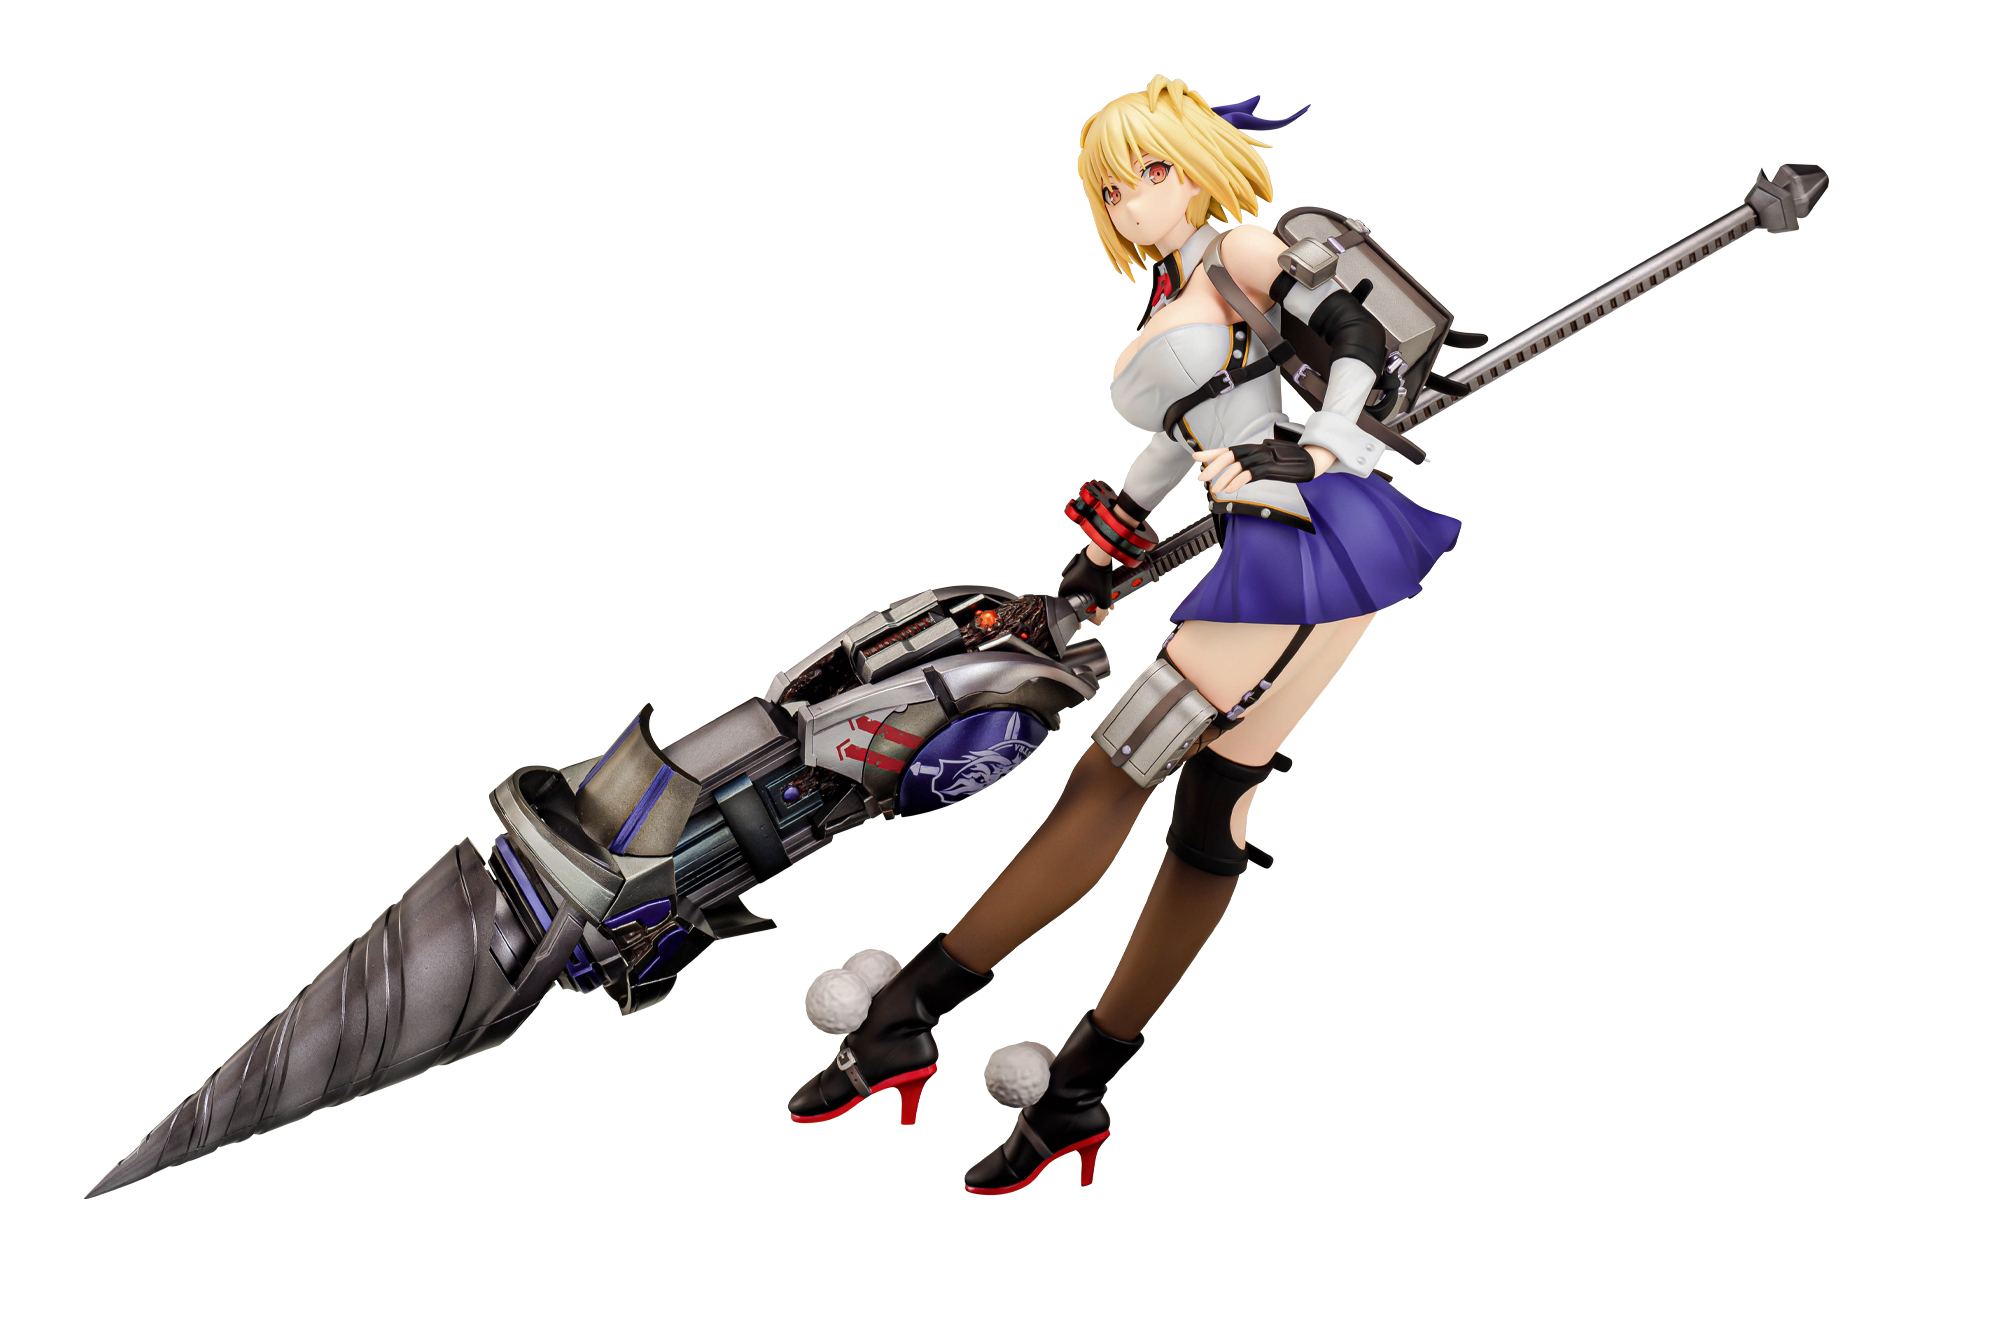 GOD EATER 3 1/7 SCALE PRE-PAINTED FIGURE: CLAIRE VICTORIOUS Plum